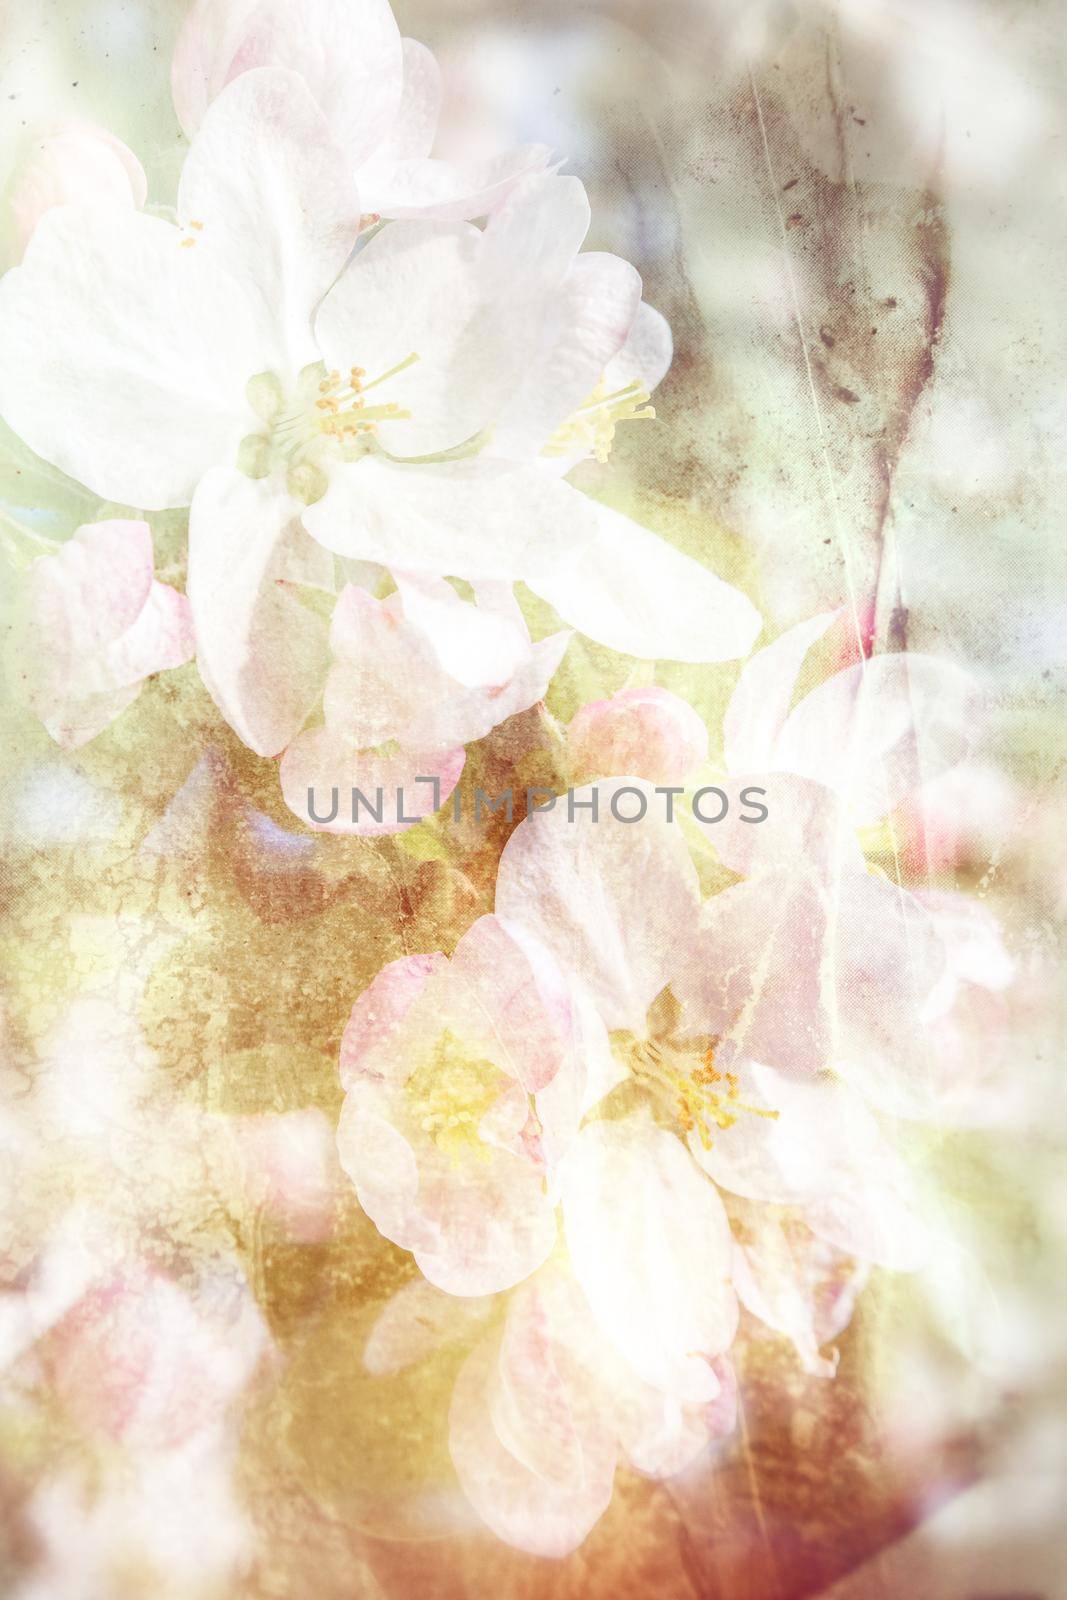 Abstract spring background image in pastel colors with the texture of apple blossoms.